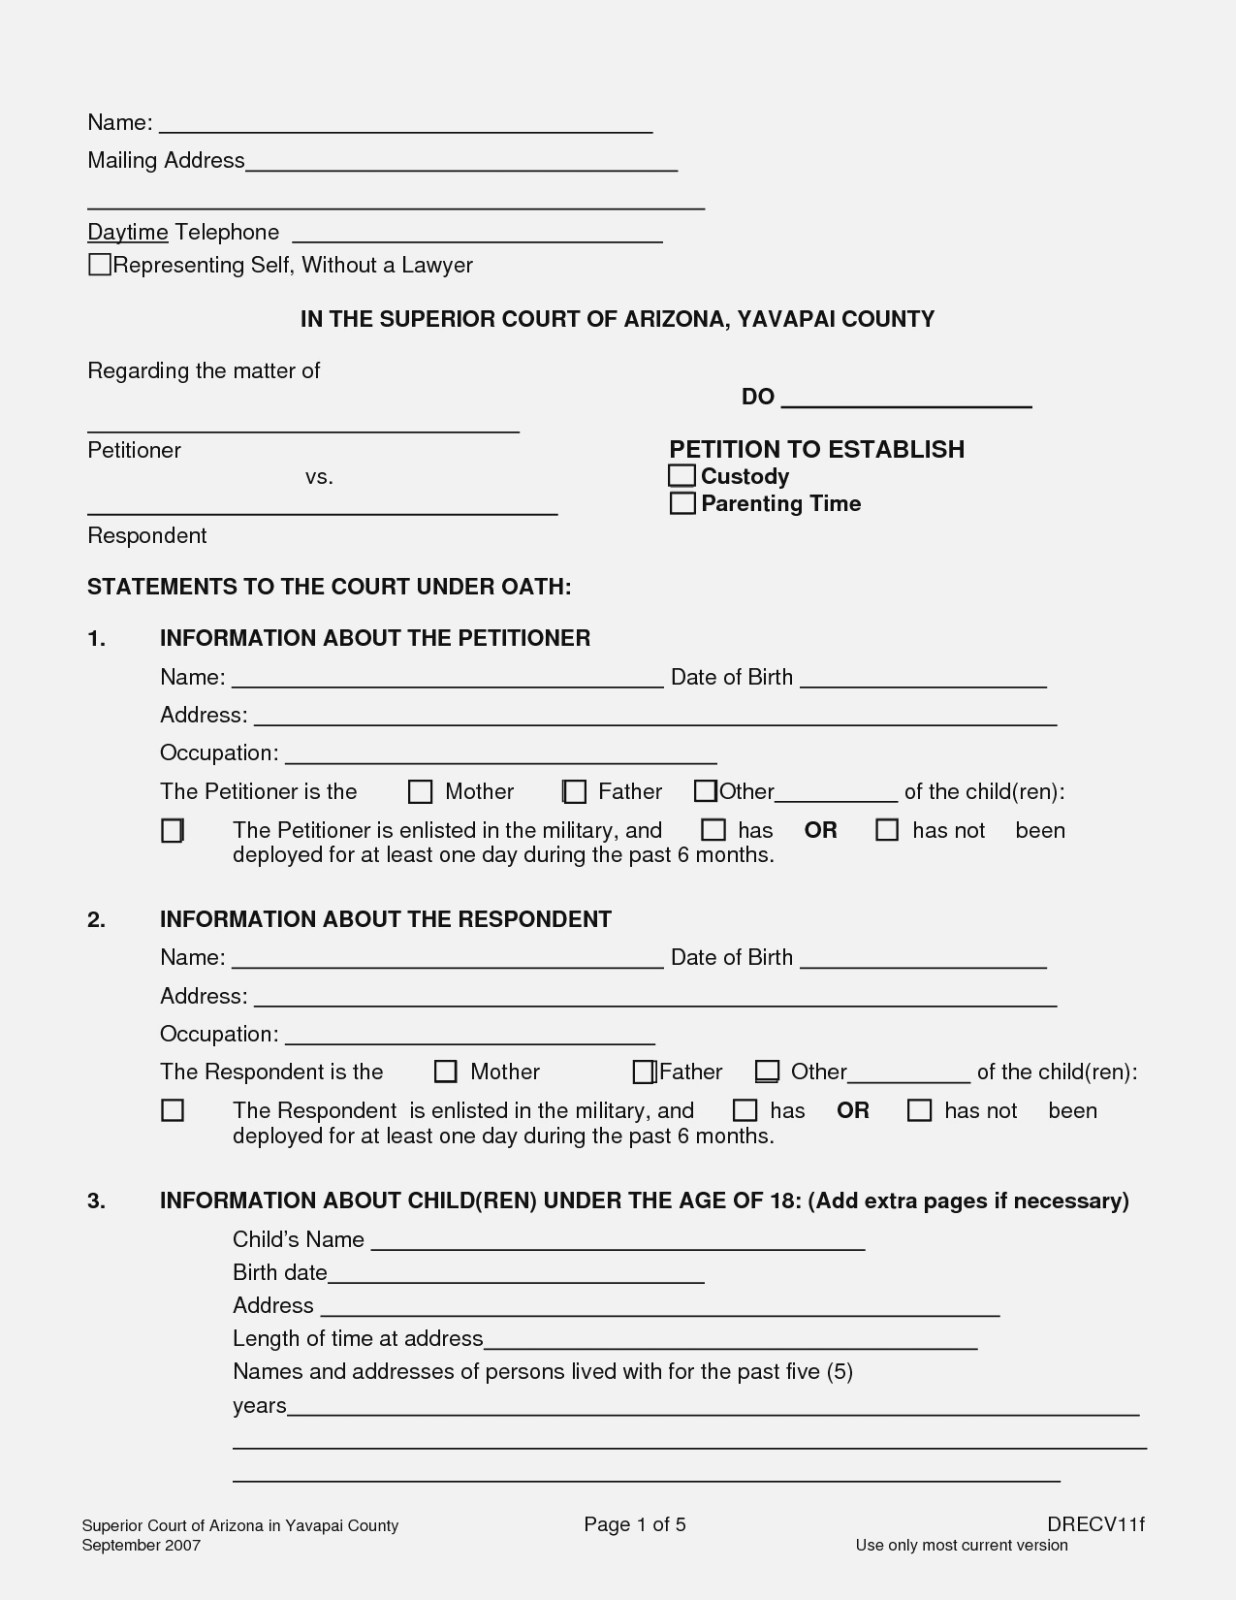 Is Free Printable | Realty Executives Mi : Invoice And Resume - Free Printable Child Custody Forms